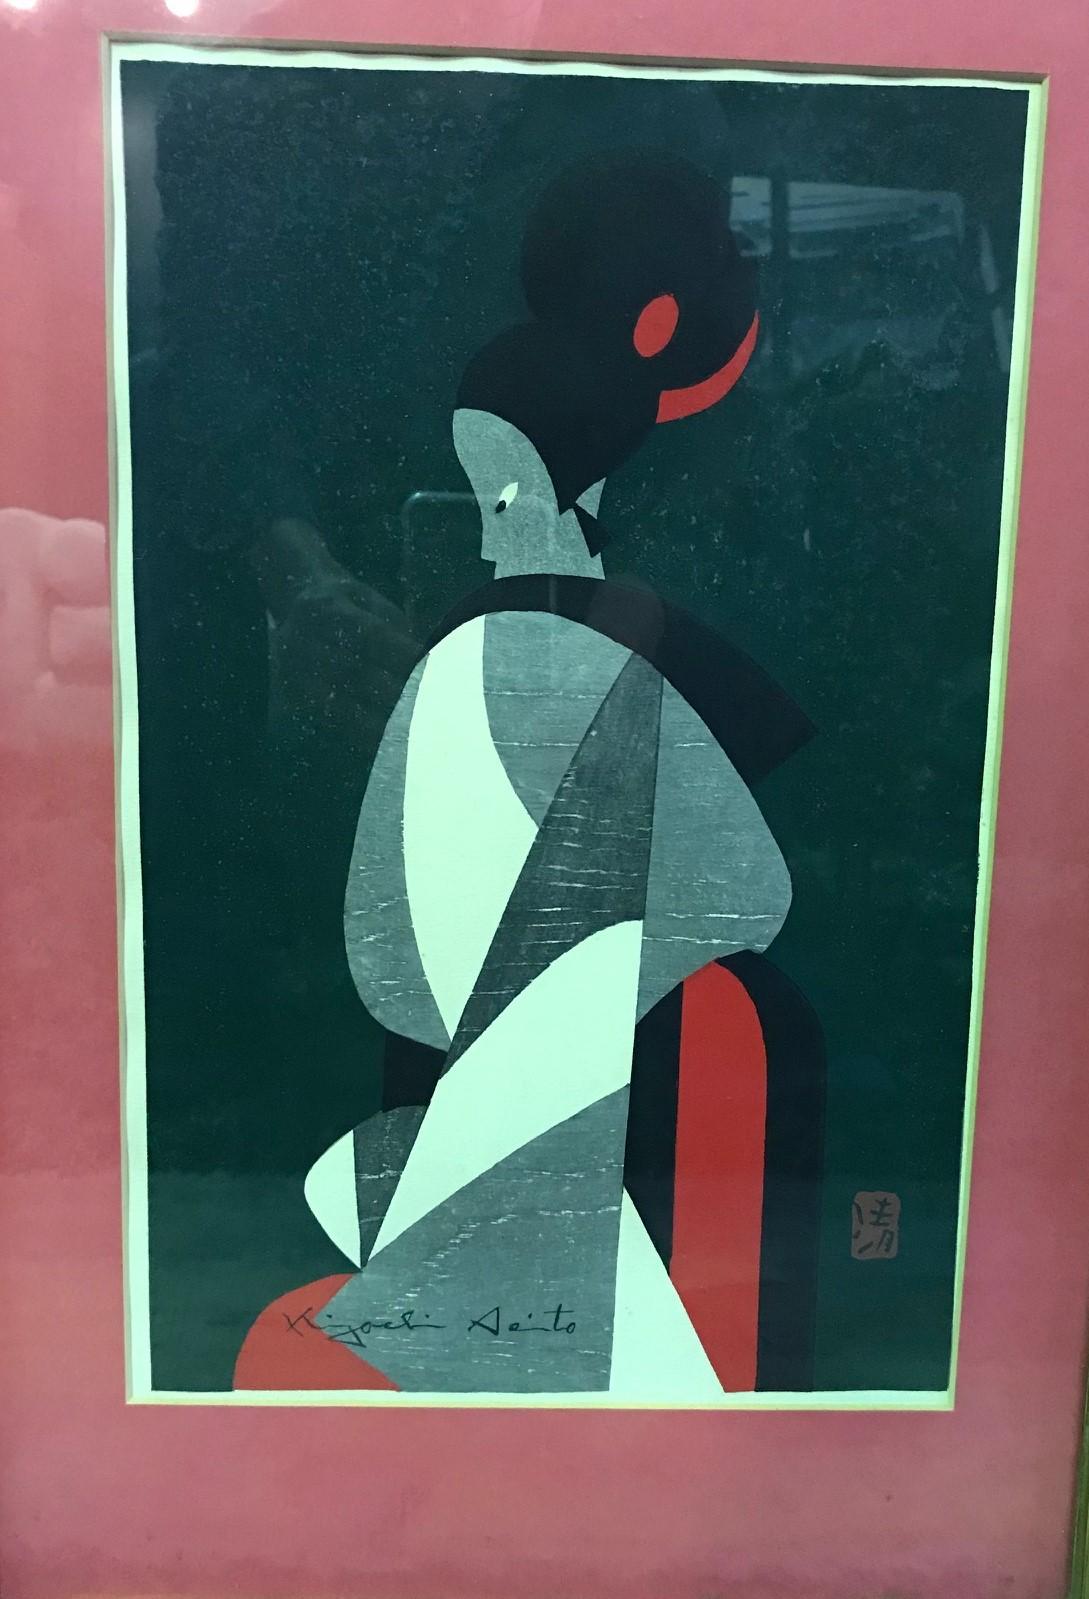 A beautiful woodblock print by famed Japanese printmaker Kiyoshi Saito. Many consider Saito to be one of the most important, if not the most important, contemporary Japanese printmakers of the 20th century. This print of a female Awaji doll is